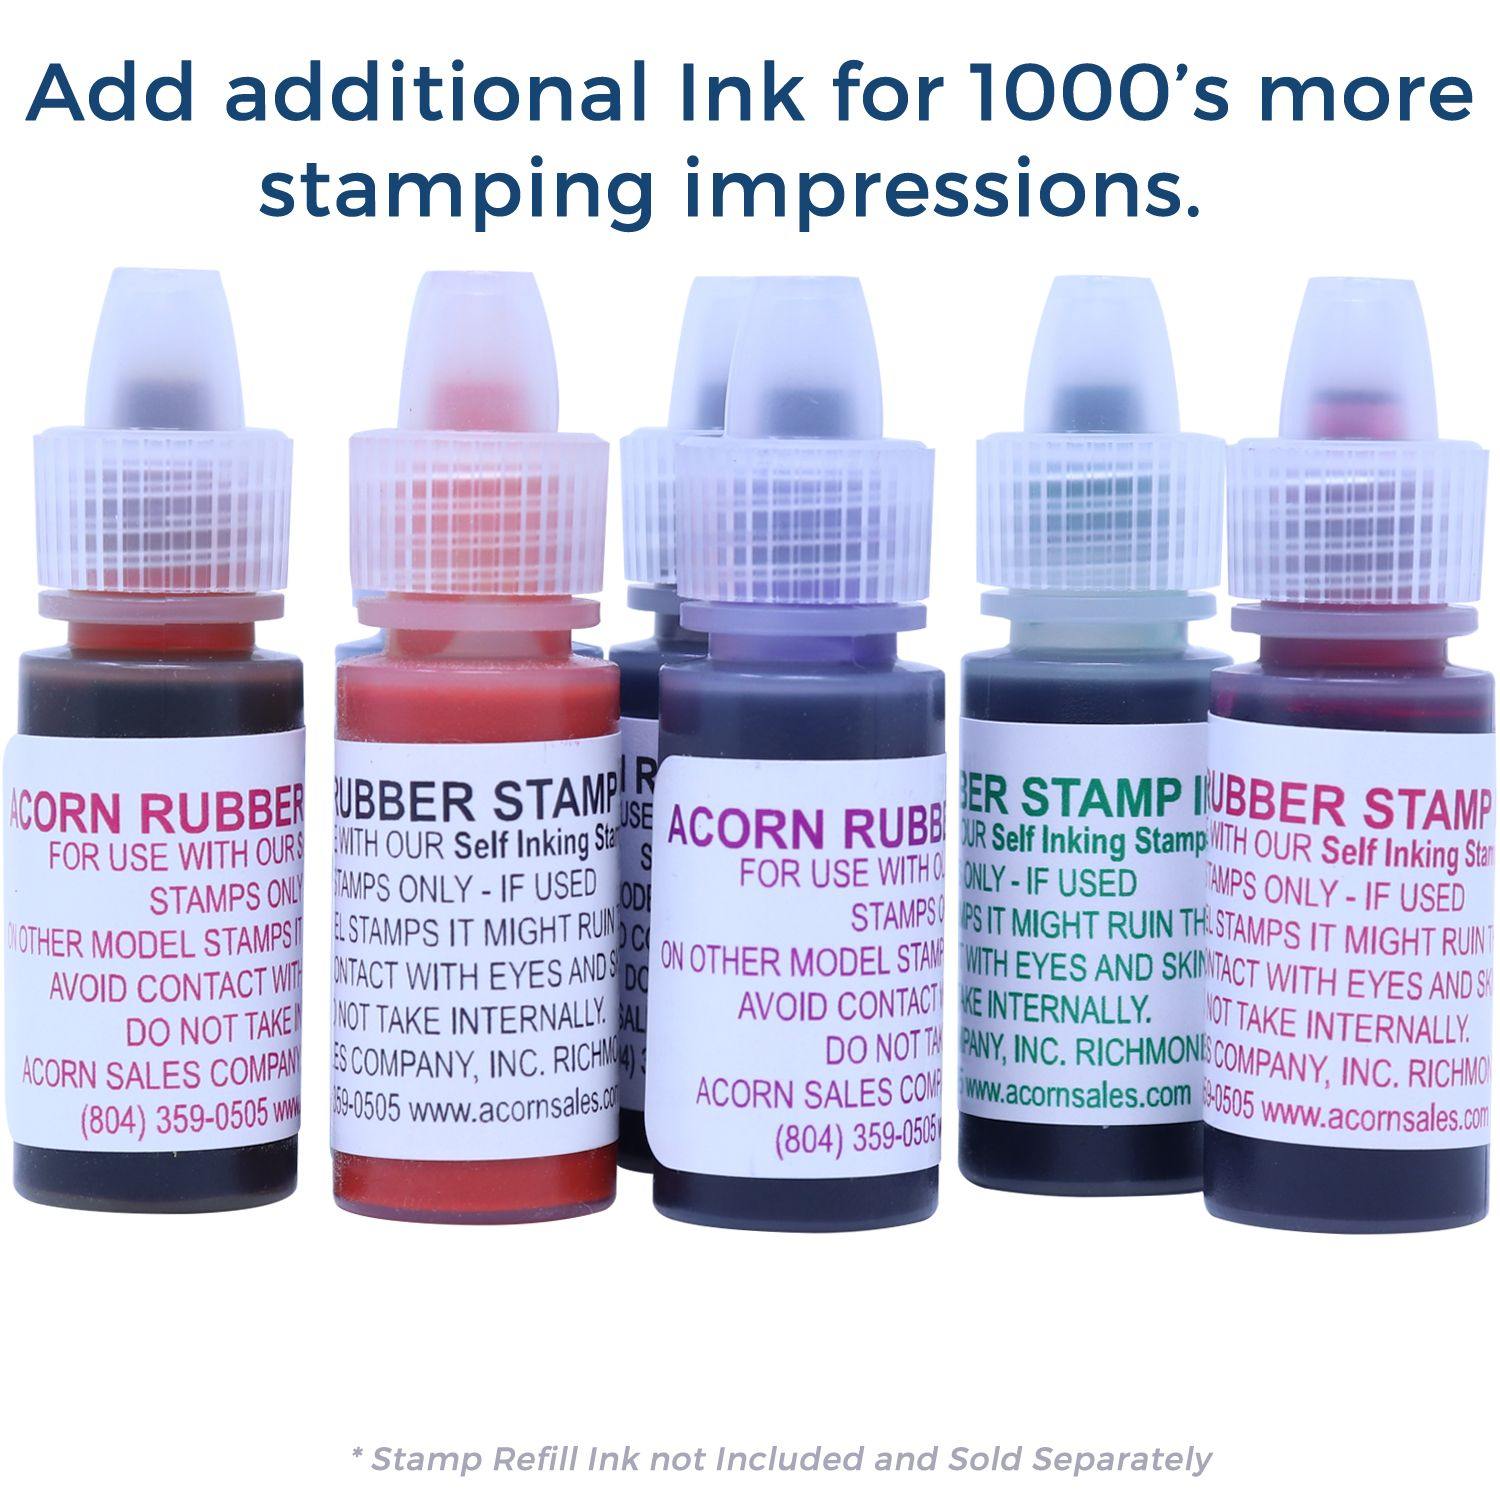 Refill Inks for Slim Pre-Inked Non-Smoker Stamp Available